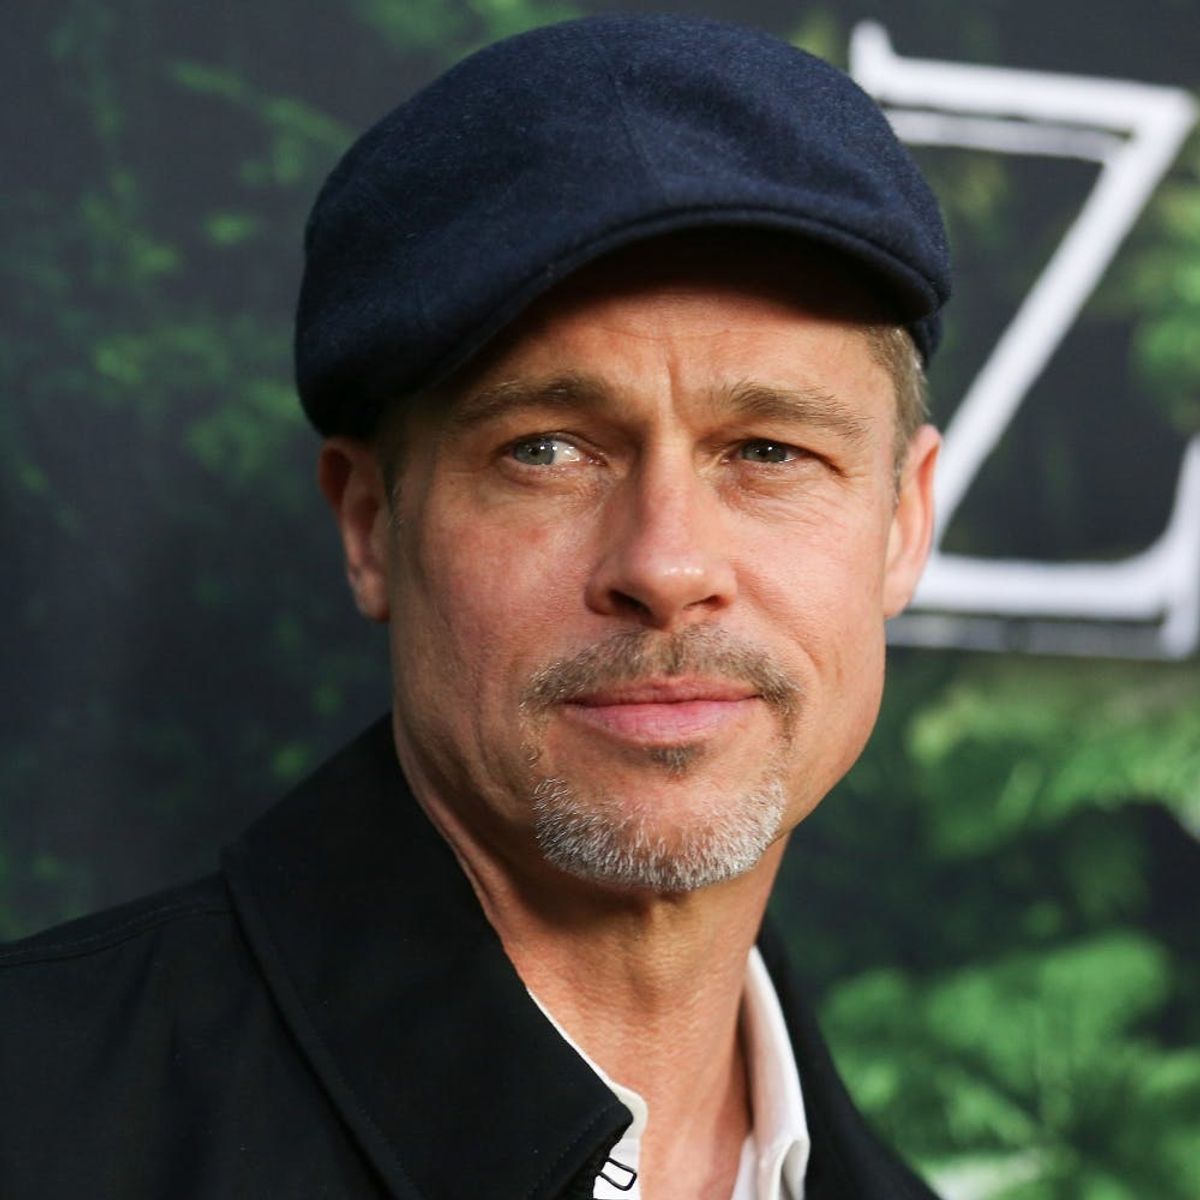 Brad Pitt Reveals How He’s Dealing With His Divorce and the Major Change He’s Made to Be a Better Father